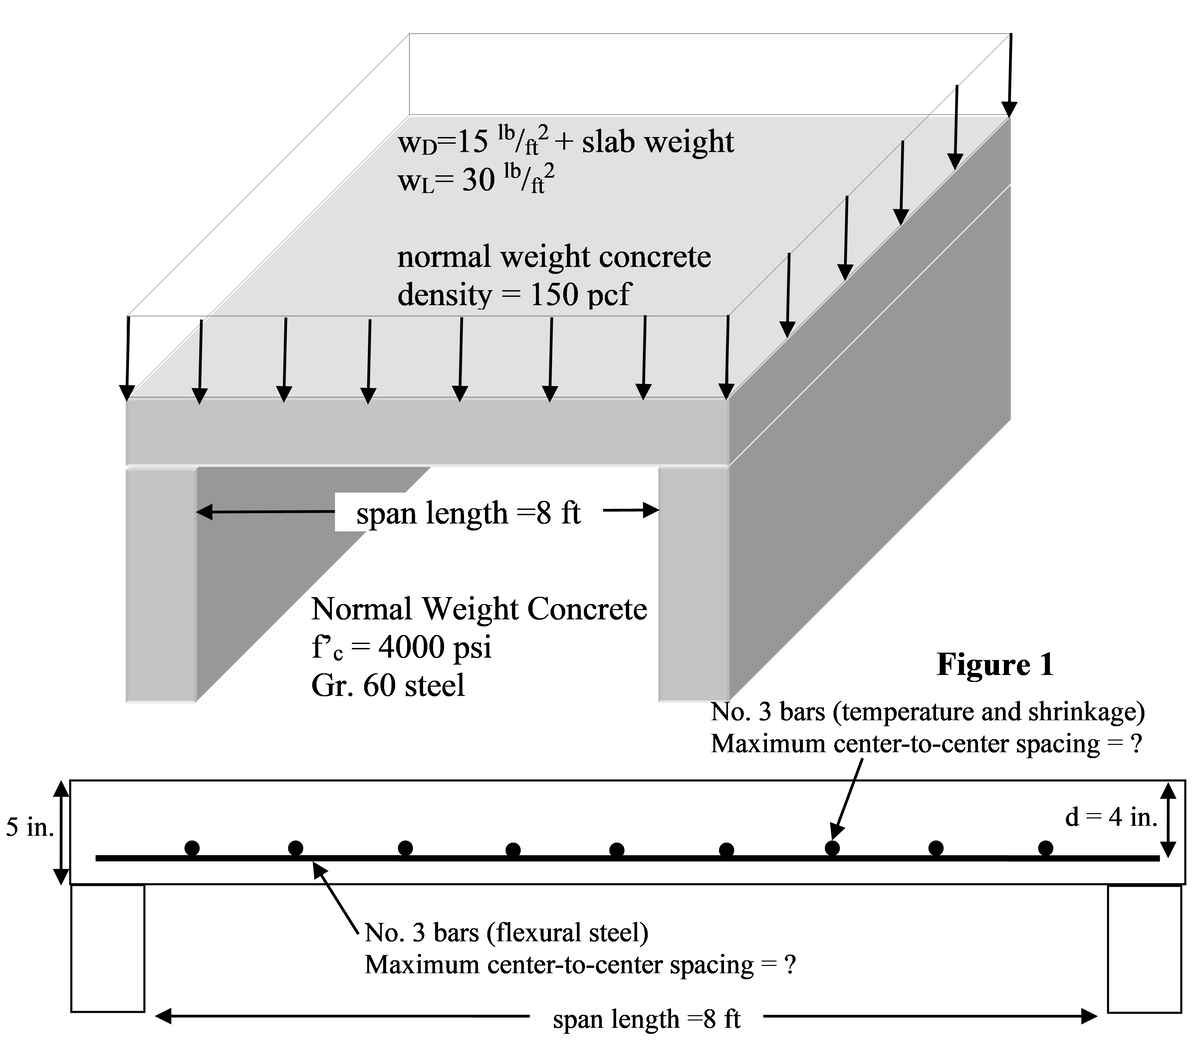 5 in.
2
wò=15 ¹² + slab weight
ft
2
WL= 30¹b/ft
normal weight concrete
density = 150 pcf
span length=8 ft →
Normal Weight Concrete
f'c = 4000 psi
Gr. 60 steel
////
Figure 1
No. 3 bars (temperature and shrinkage)
Maximum center-to-center spacing = ?
No. 3 bars (flexural steel)
Maximum center-to-center spacing = ?
span length =8 ft
d = 4 in.